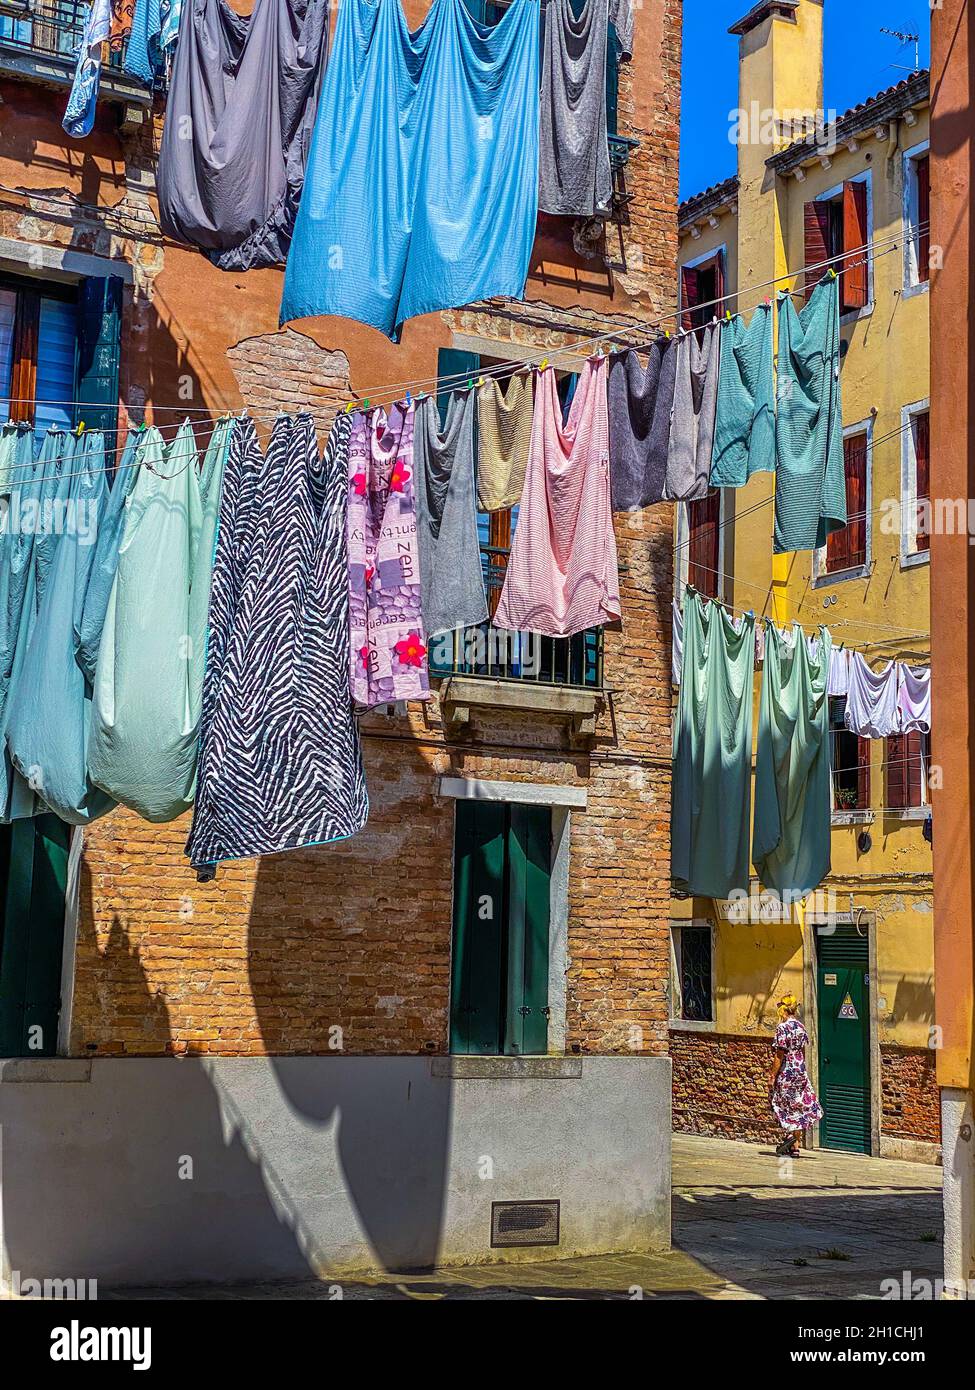 Woman walking under Hanging clothes put to dry on a small traditional street of Venice, Italy. Travel background Stock Photo